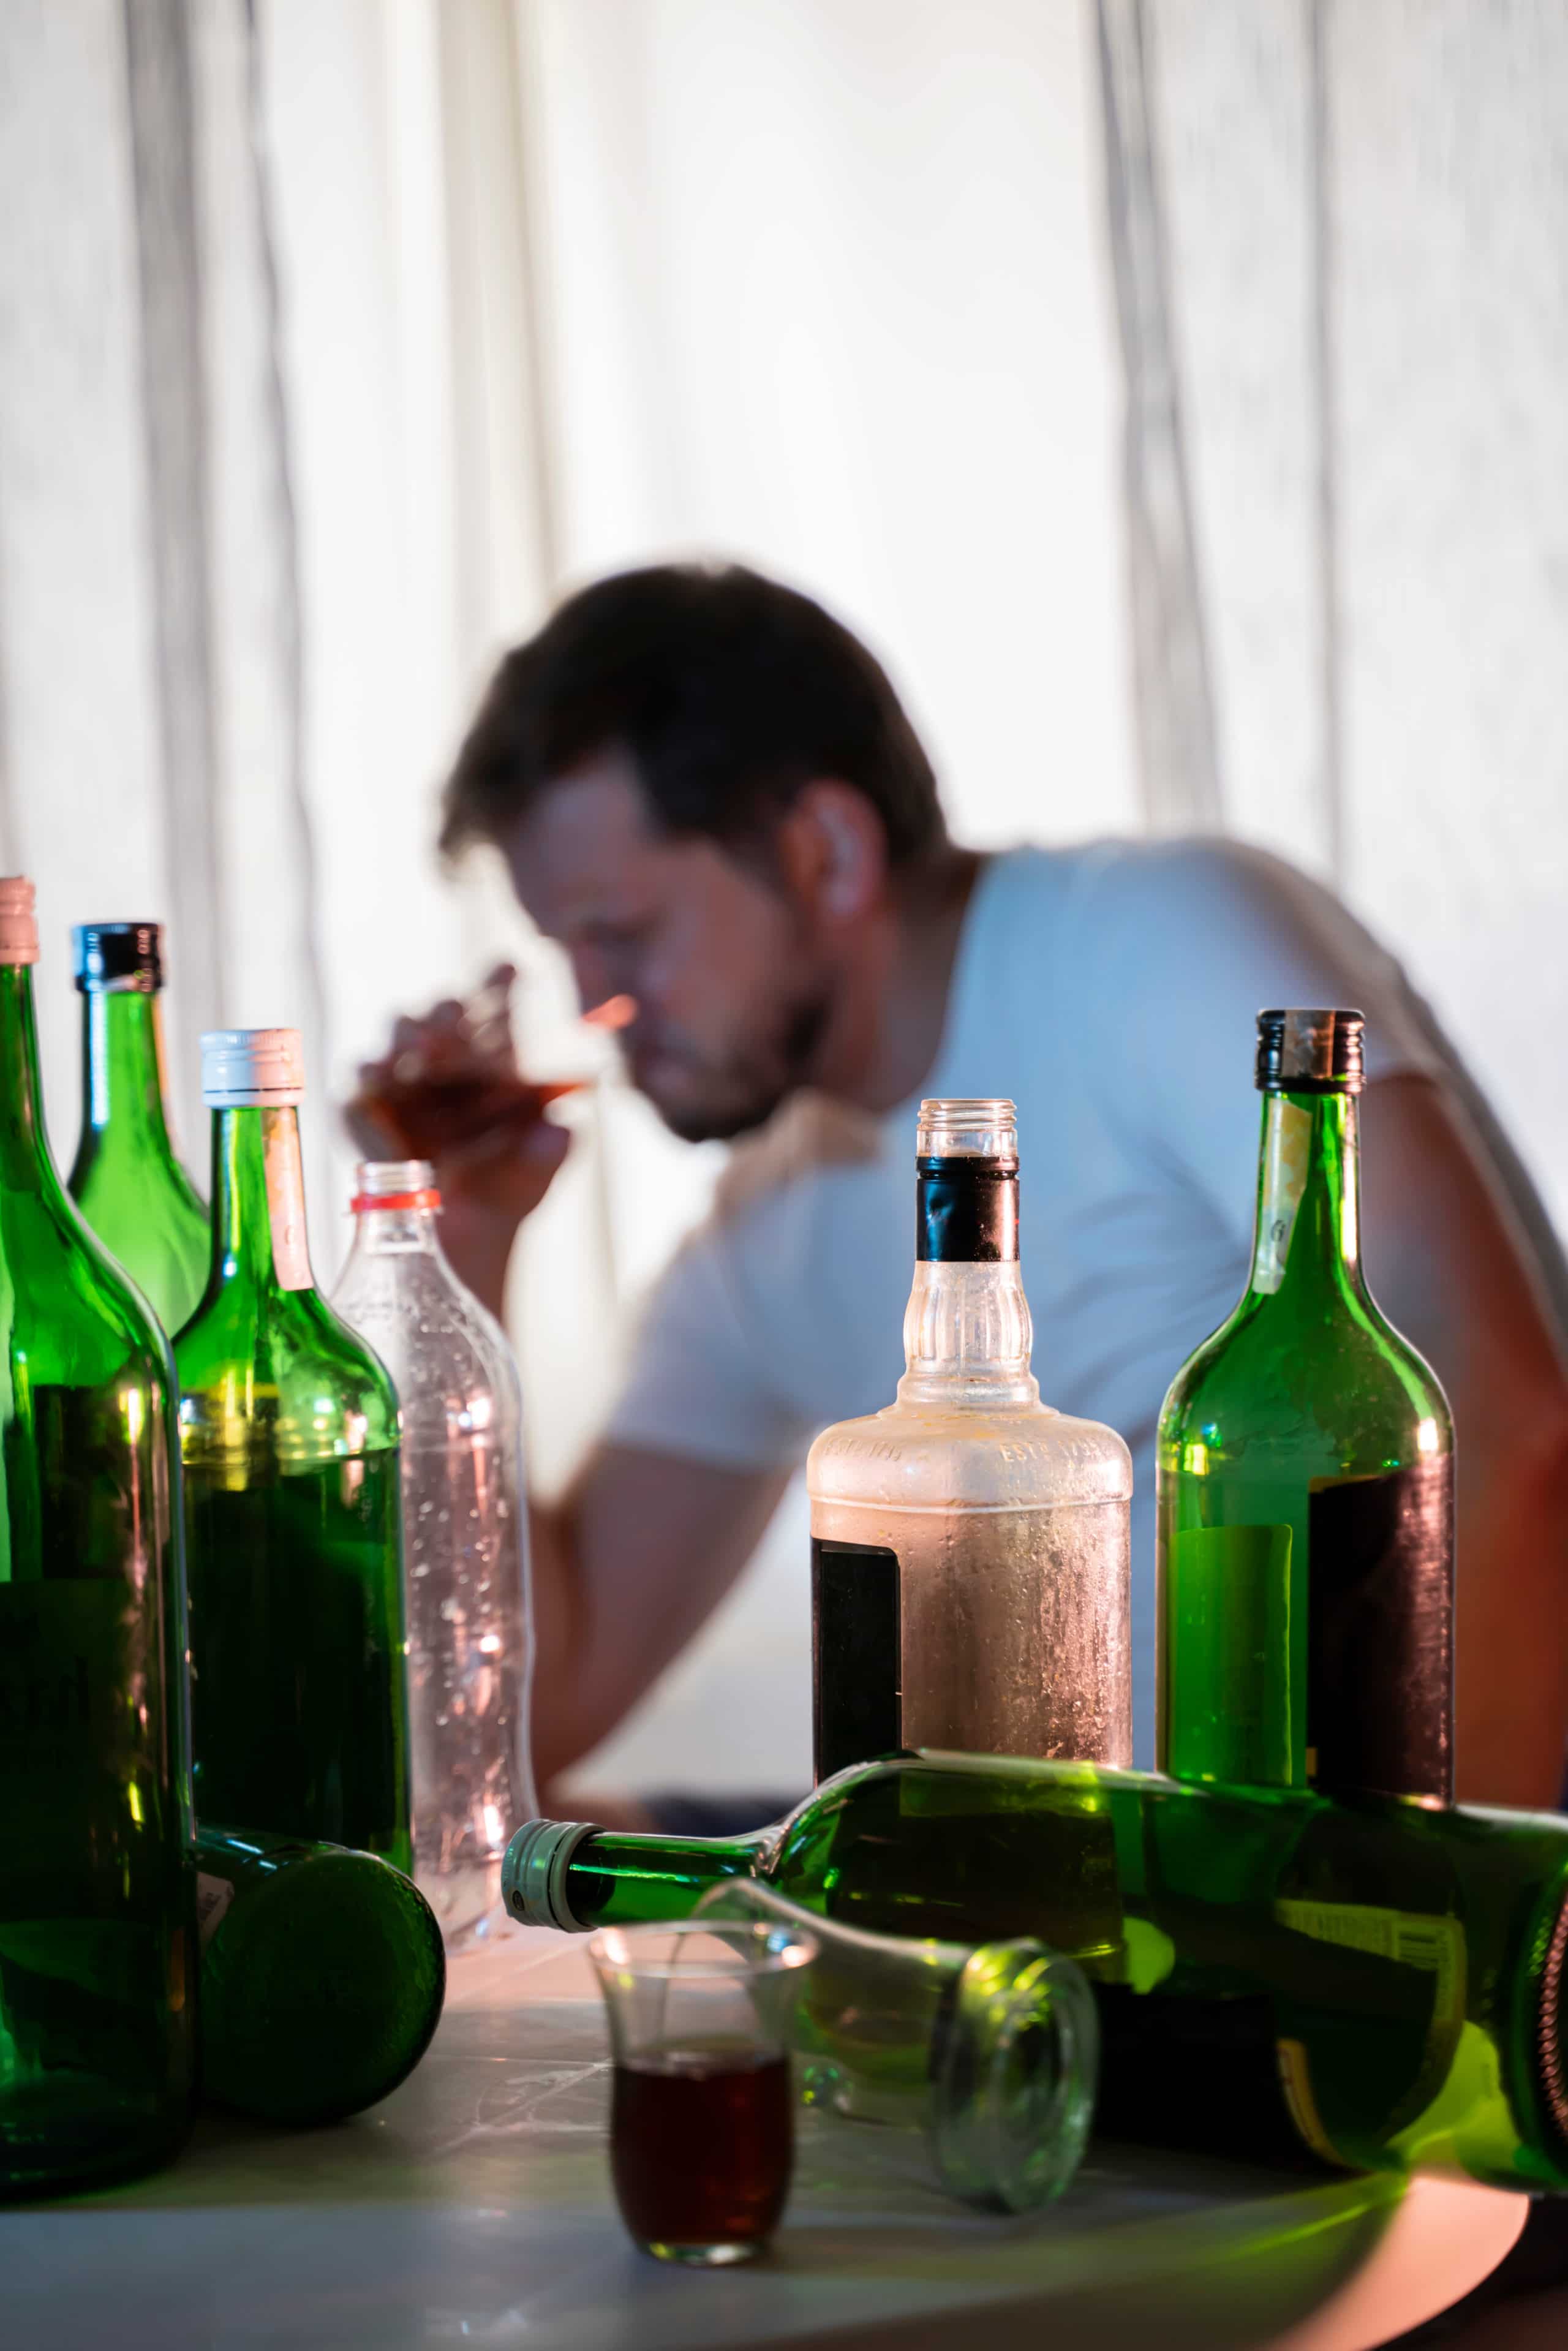 What is Alcoholism?